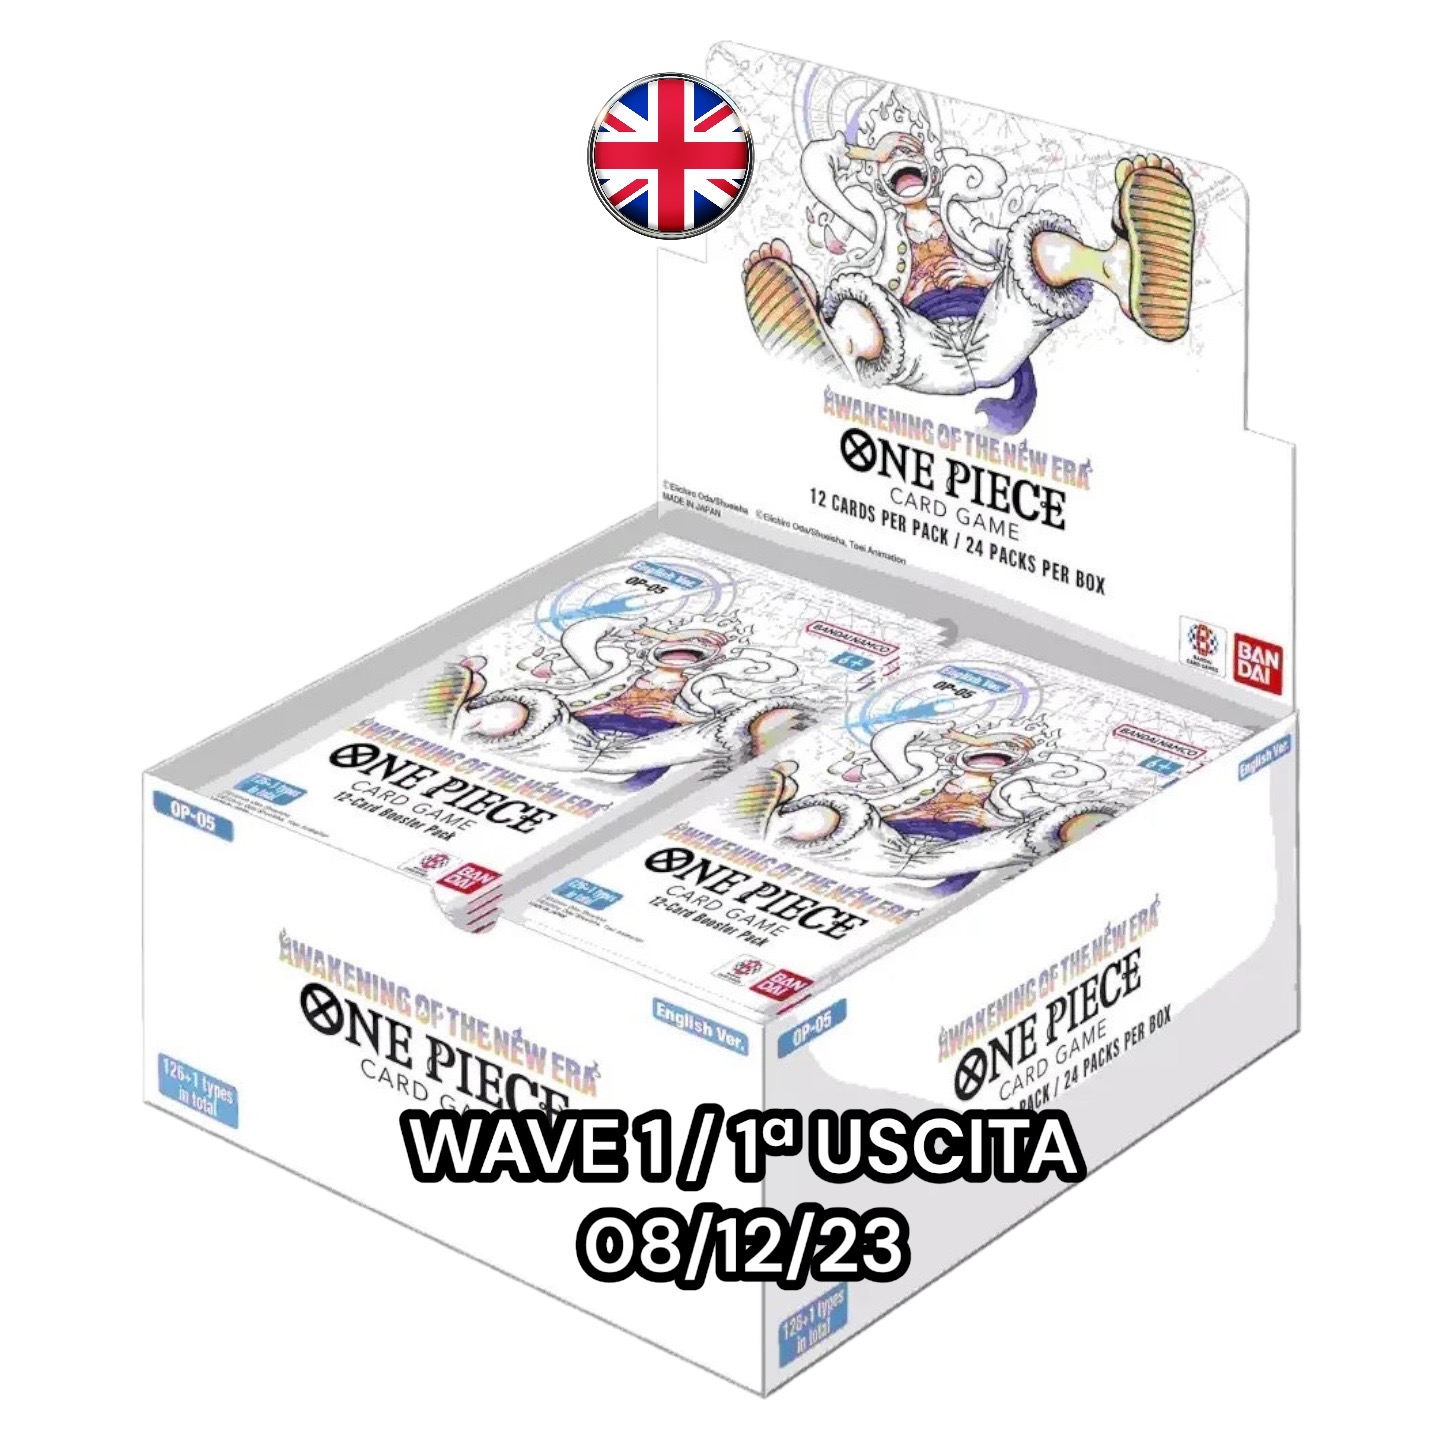 One Piece OP-05 – Awakening of the new era – One Piece Card Game Box OP05  (24 Bustine) ENG wave 1 08/12/24